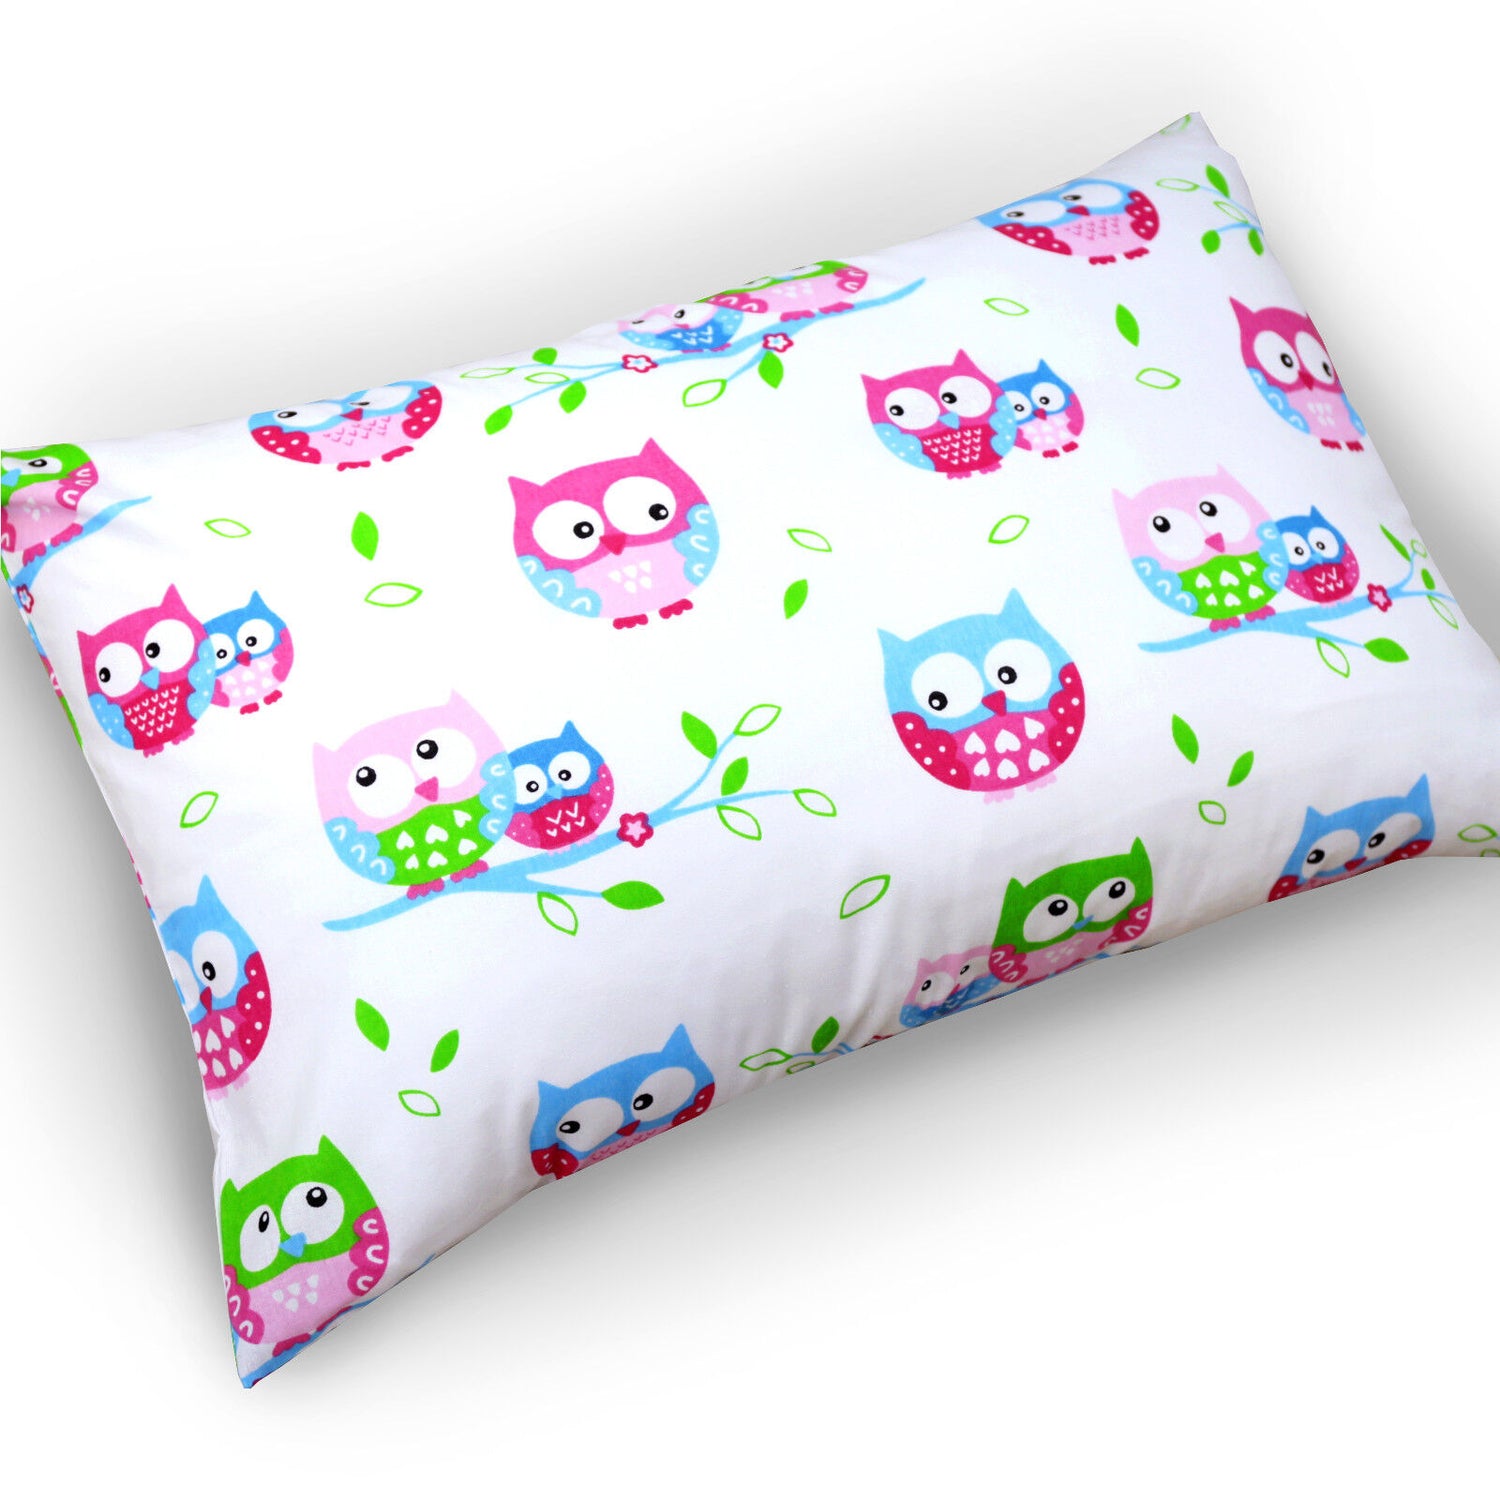 Baby Pillow case with zipper closure 60x40cm Cotton ANTI-ALLERGENIC Owls White